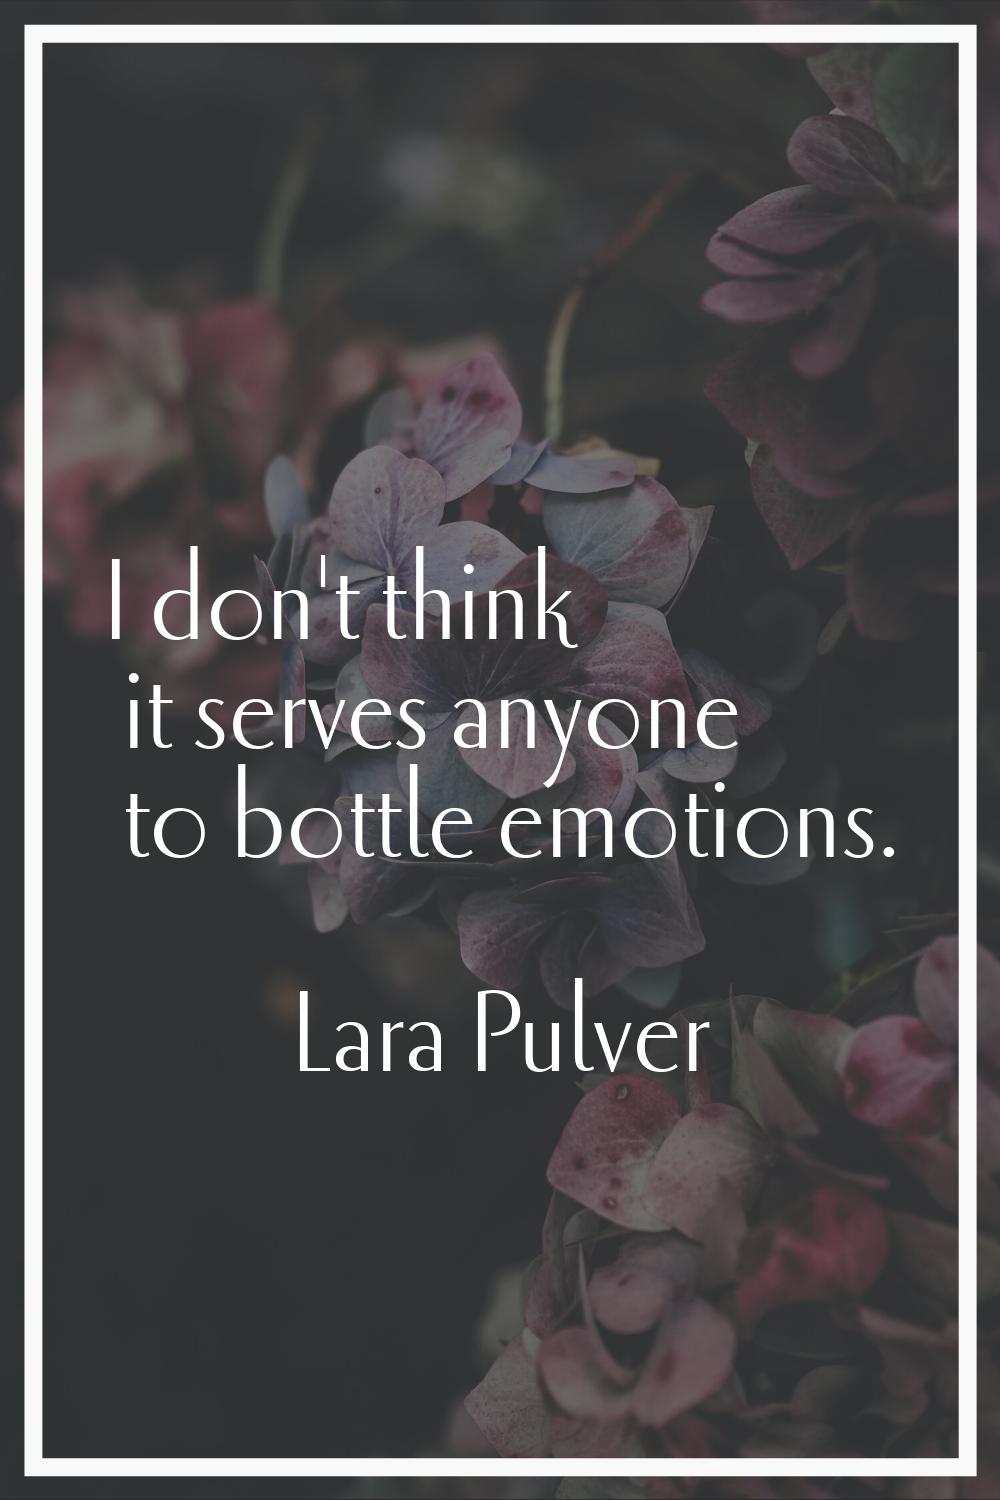 I don't think it serves anyone to bottle emotions.